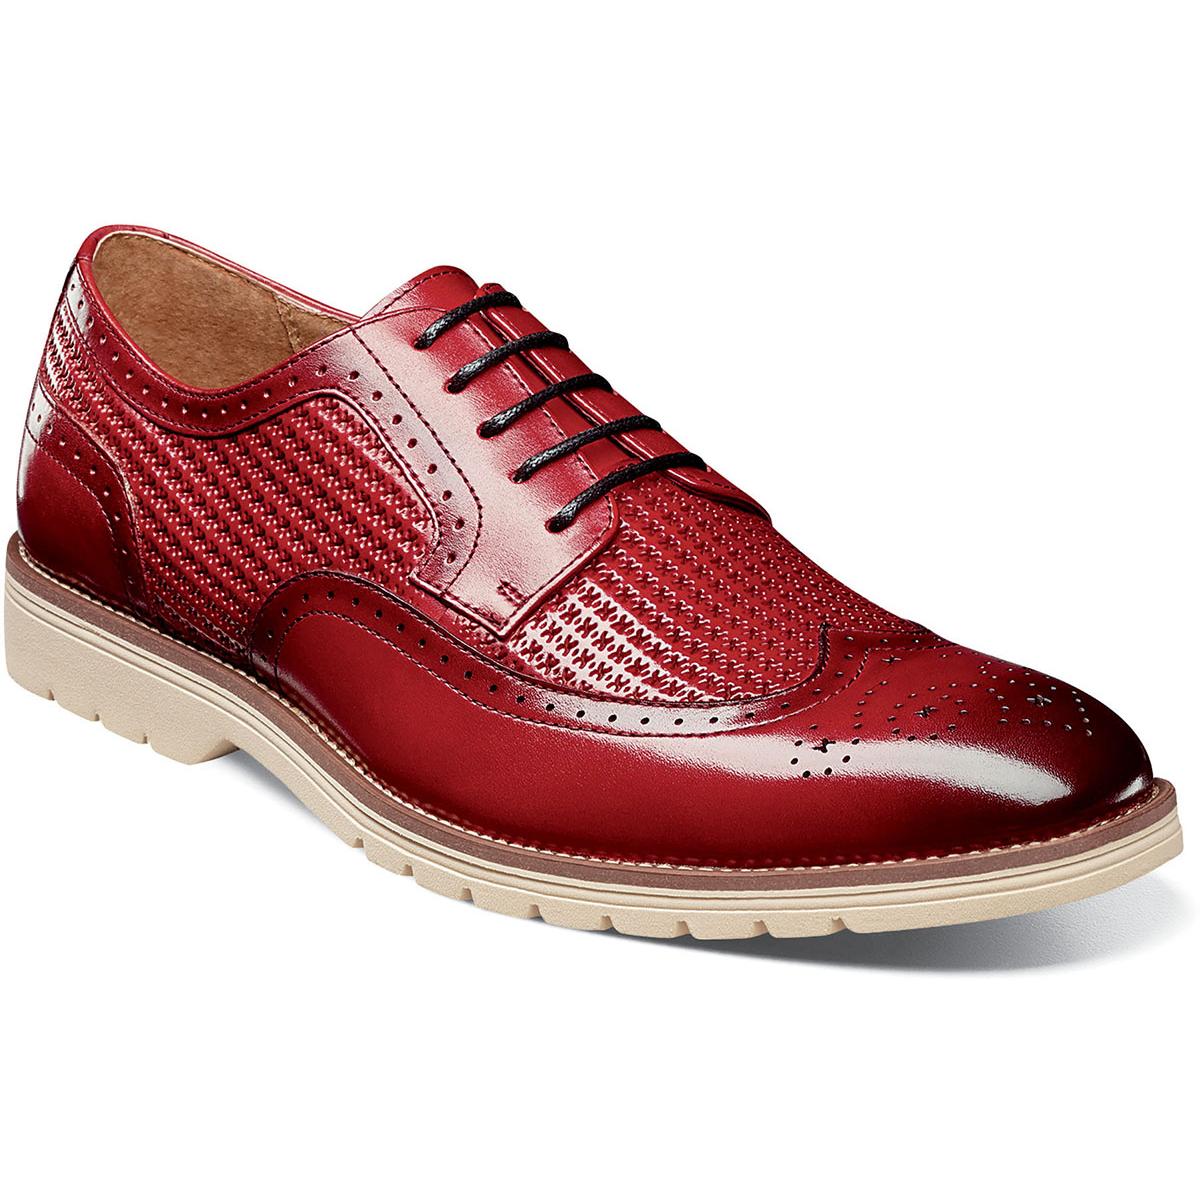 Stacy Adams Emile Red Genuine Leather Medallion Toe Shoes 25236-240 ...